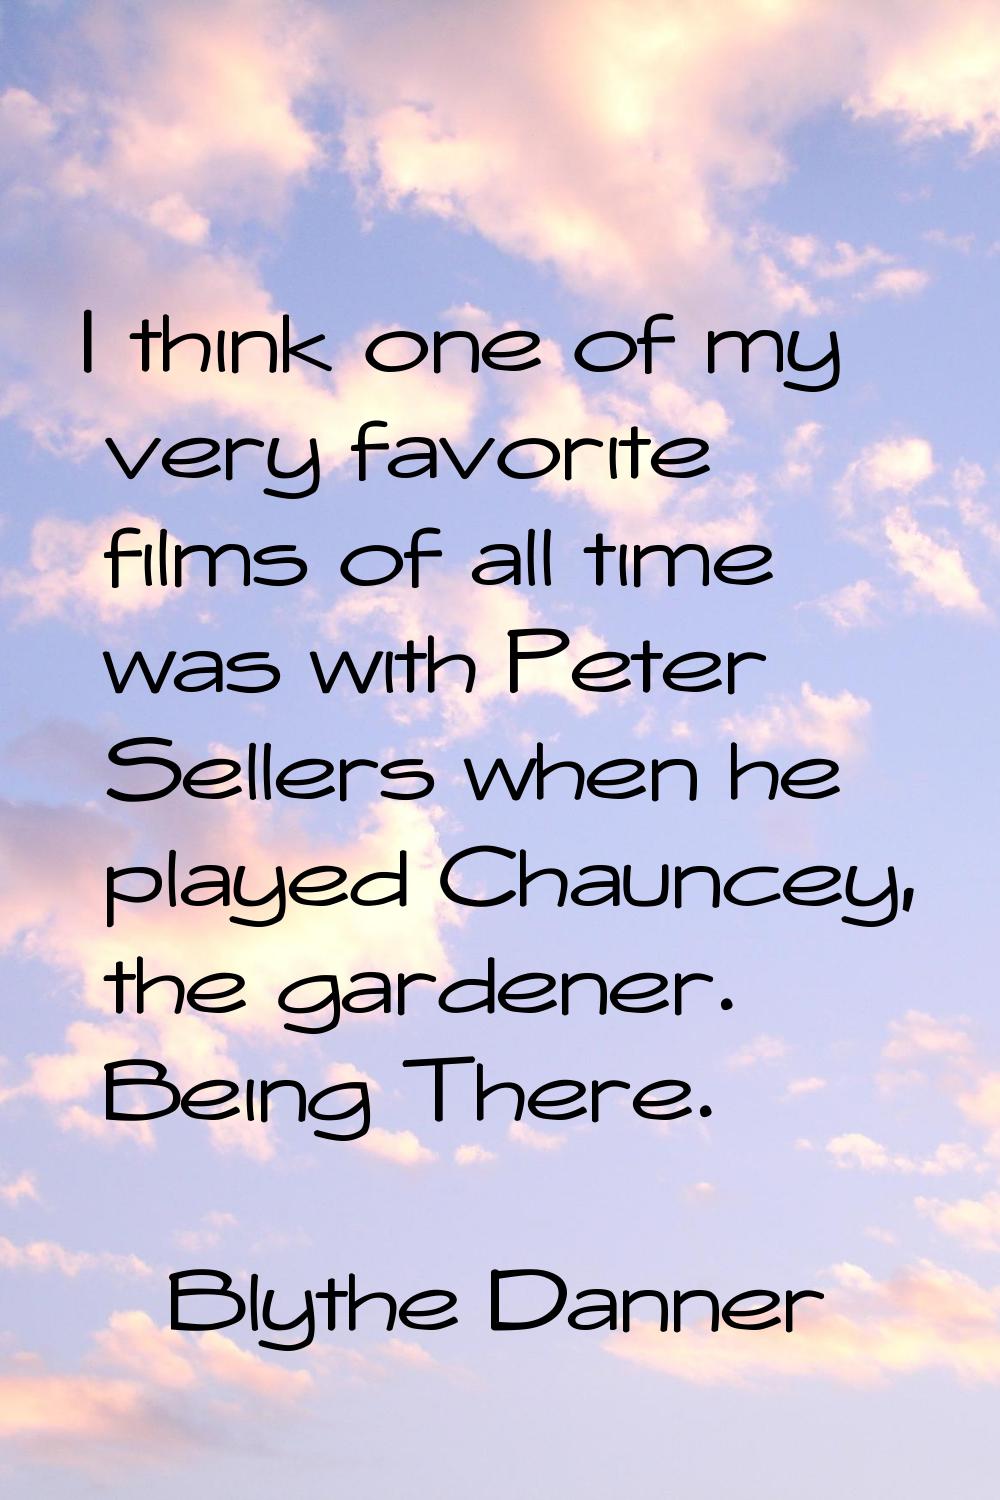 I think one of my very favorite films of all time was with Peter Sellers when he played Chauncey, t